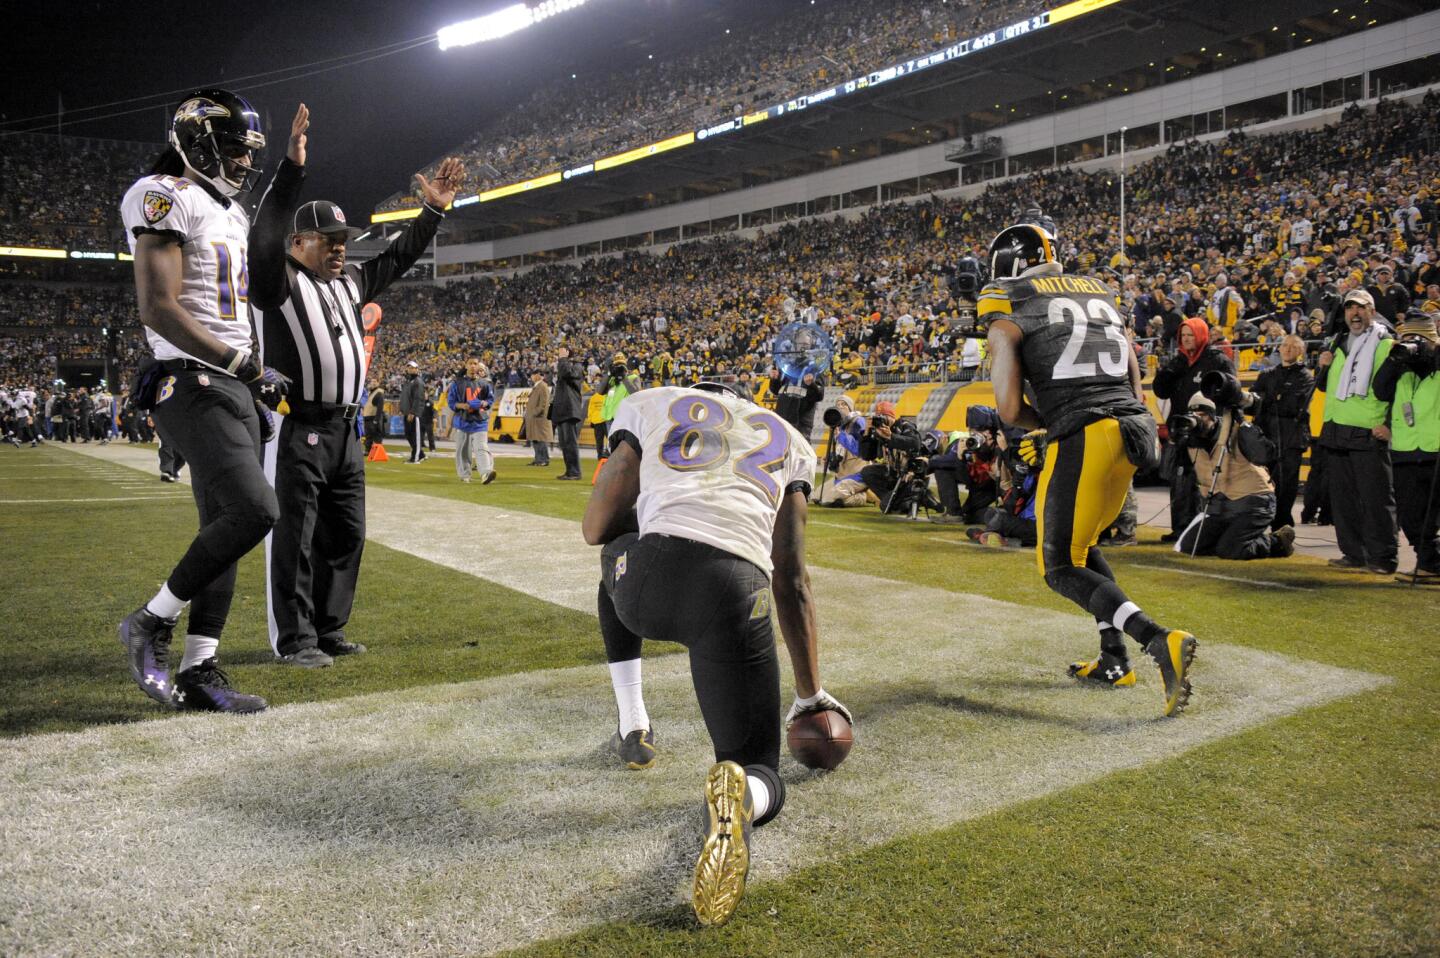 The Ravens had never beaten the Pittsburgh Steelers in the postseason until they dominated their archrival on the Steelers' home field in the wild-card round. The 30-17 victory might have been the Ravens' most complete performance of the season.